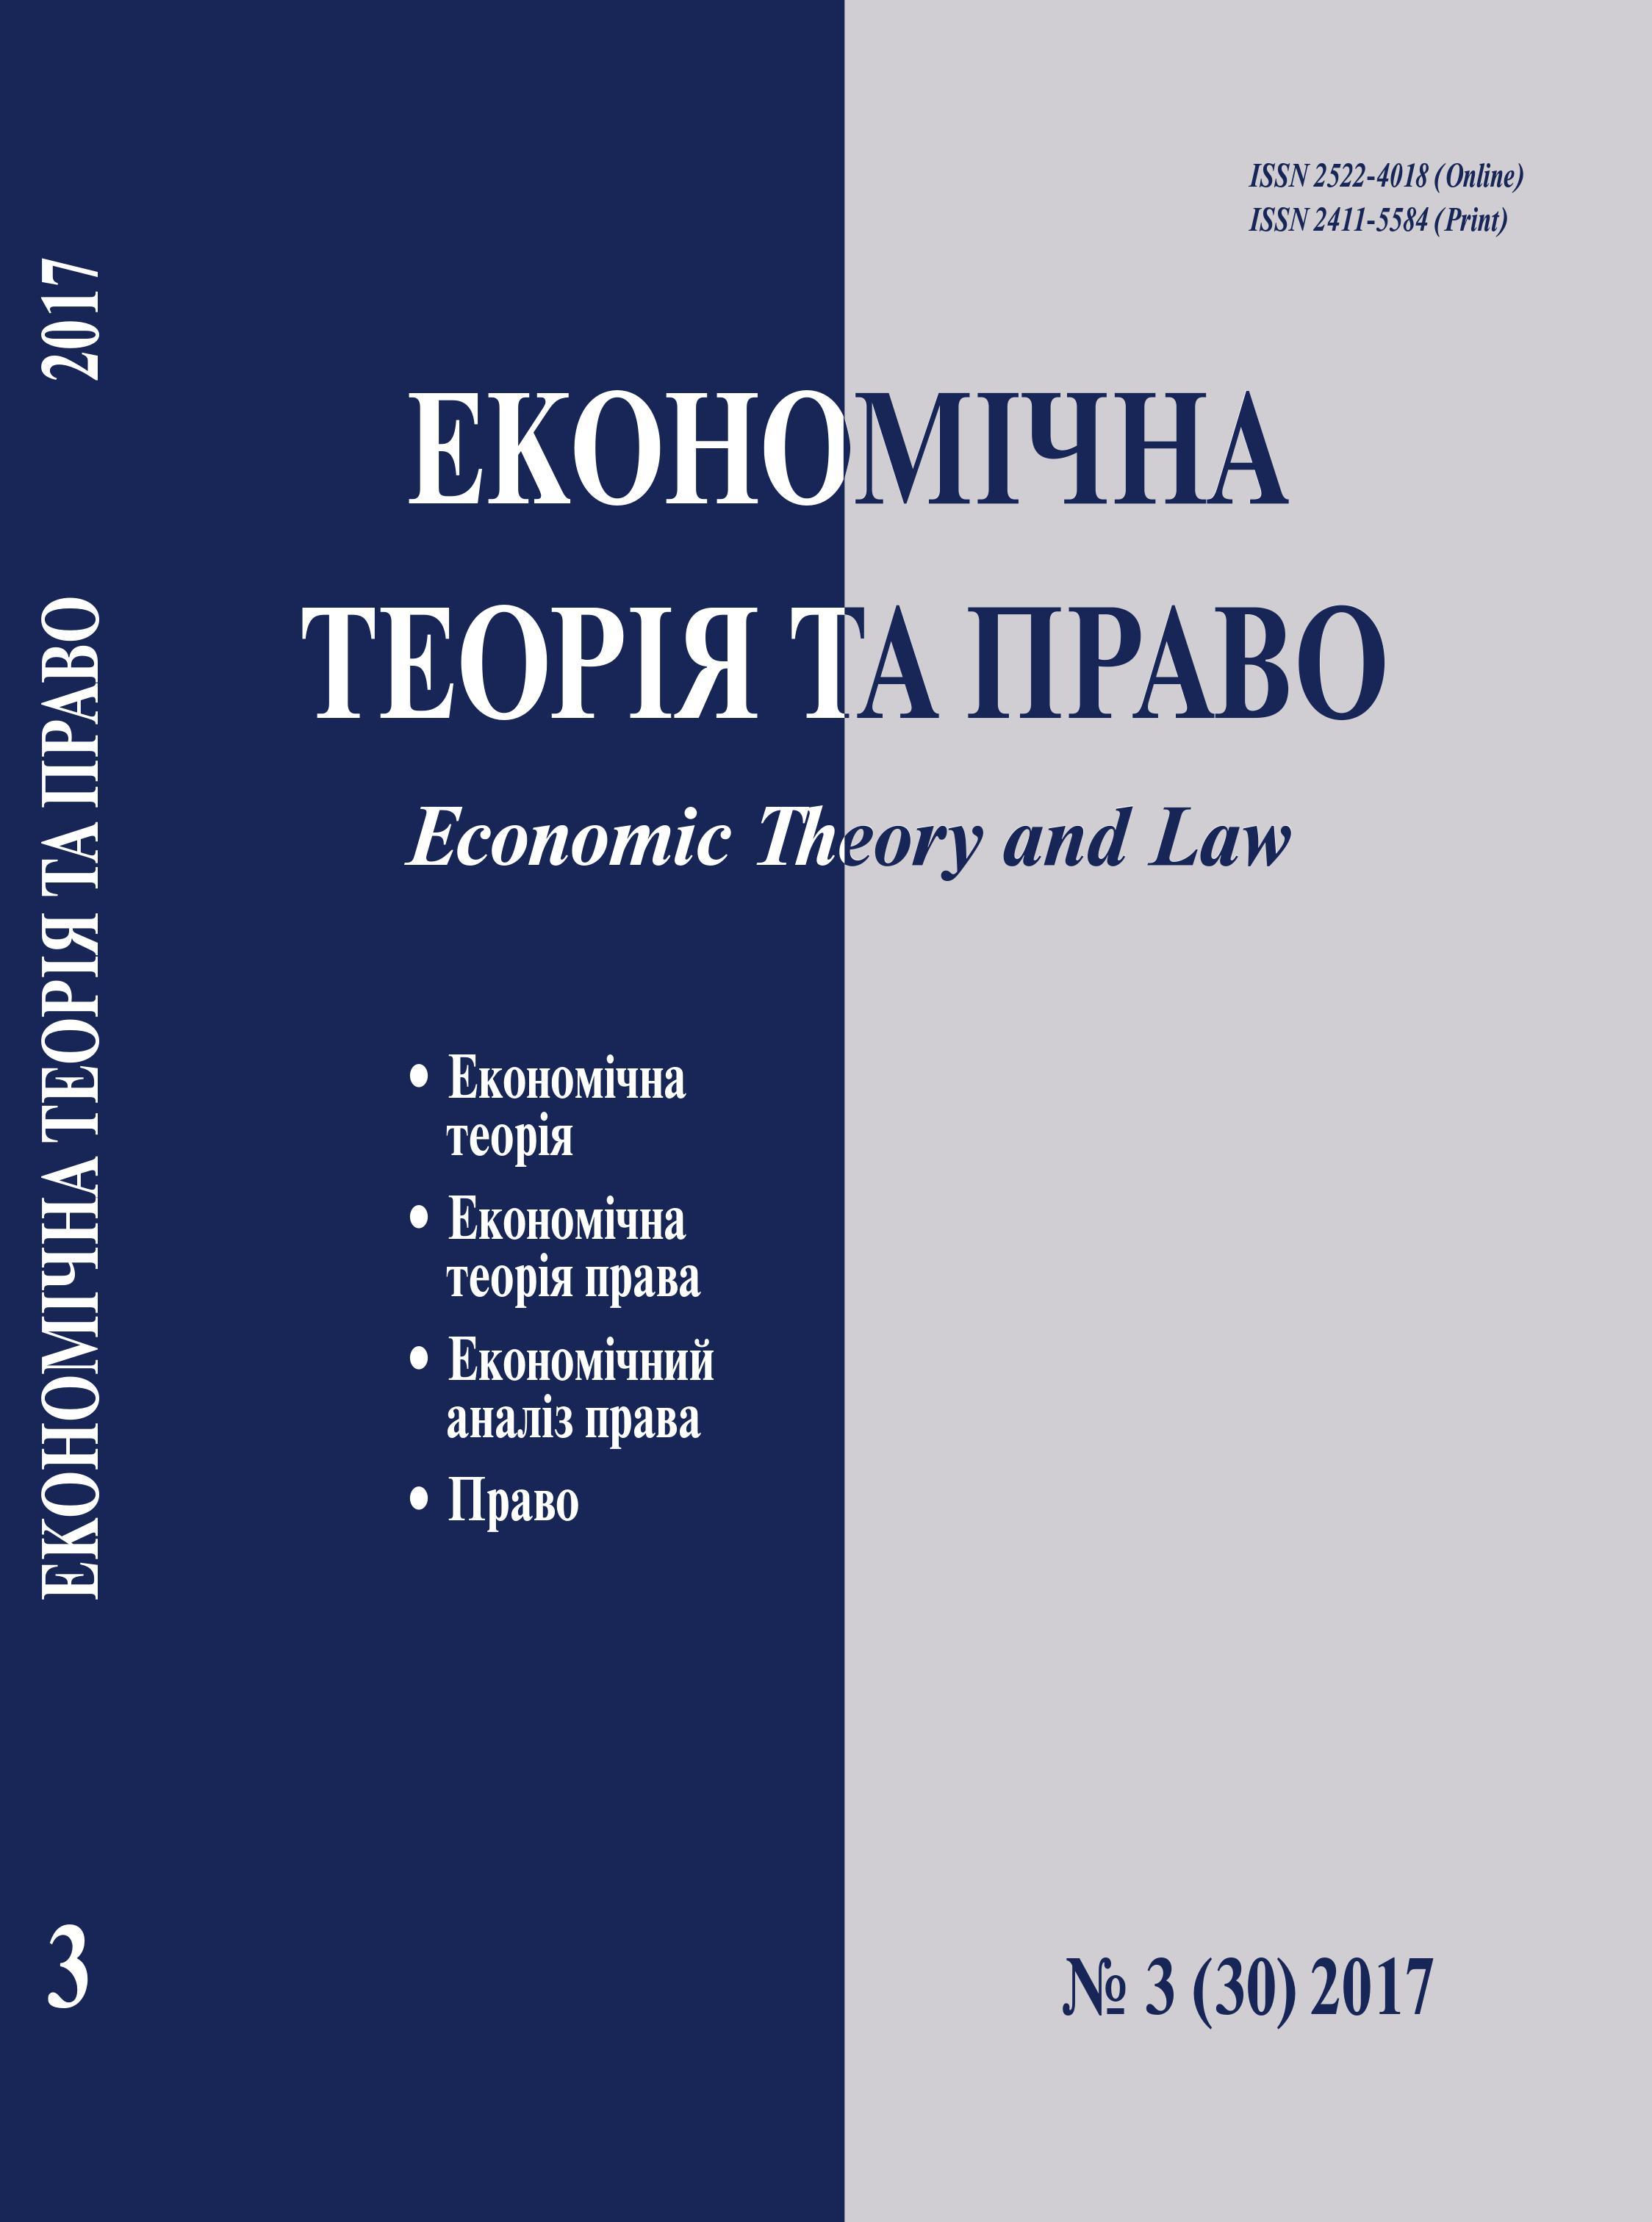 Employment by economic activities in the republic of Moldova and the European union Cover Image